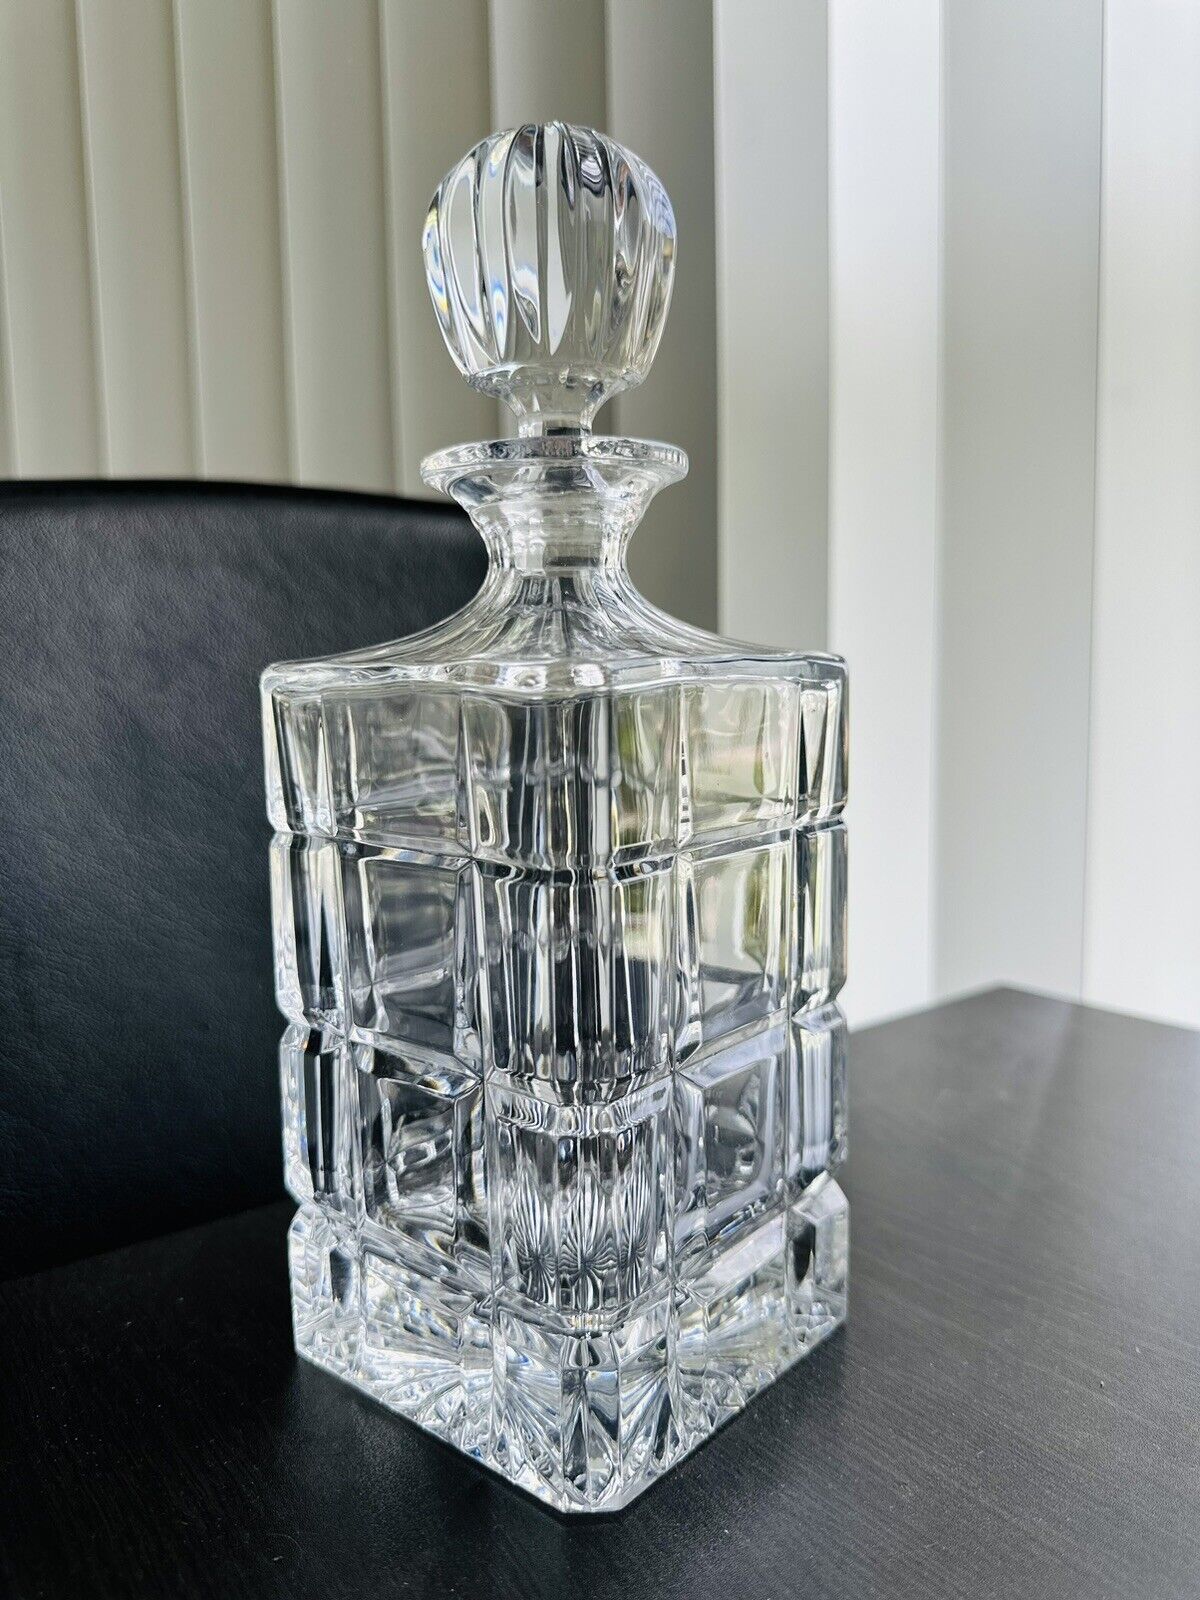 Vintage Towle Crystal Decanter Made in Poland